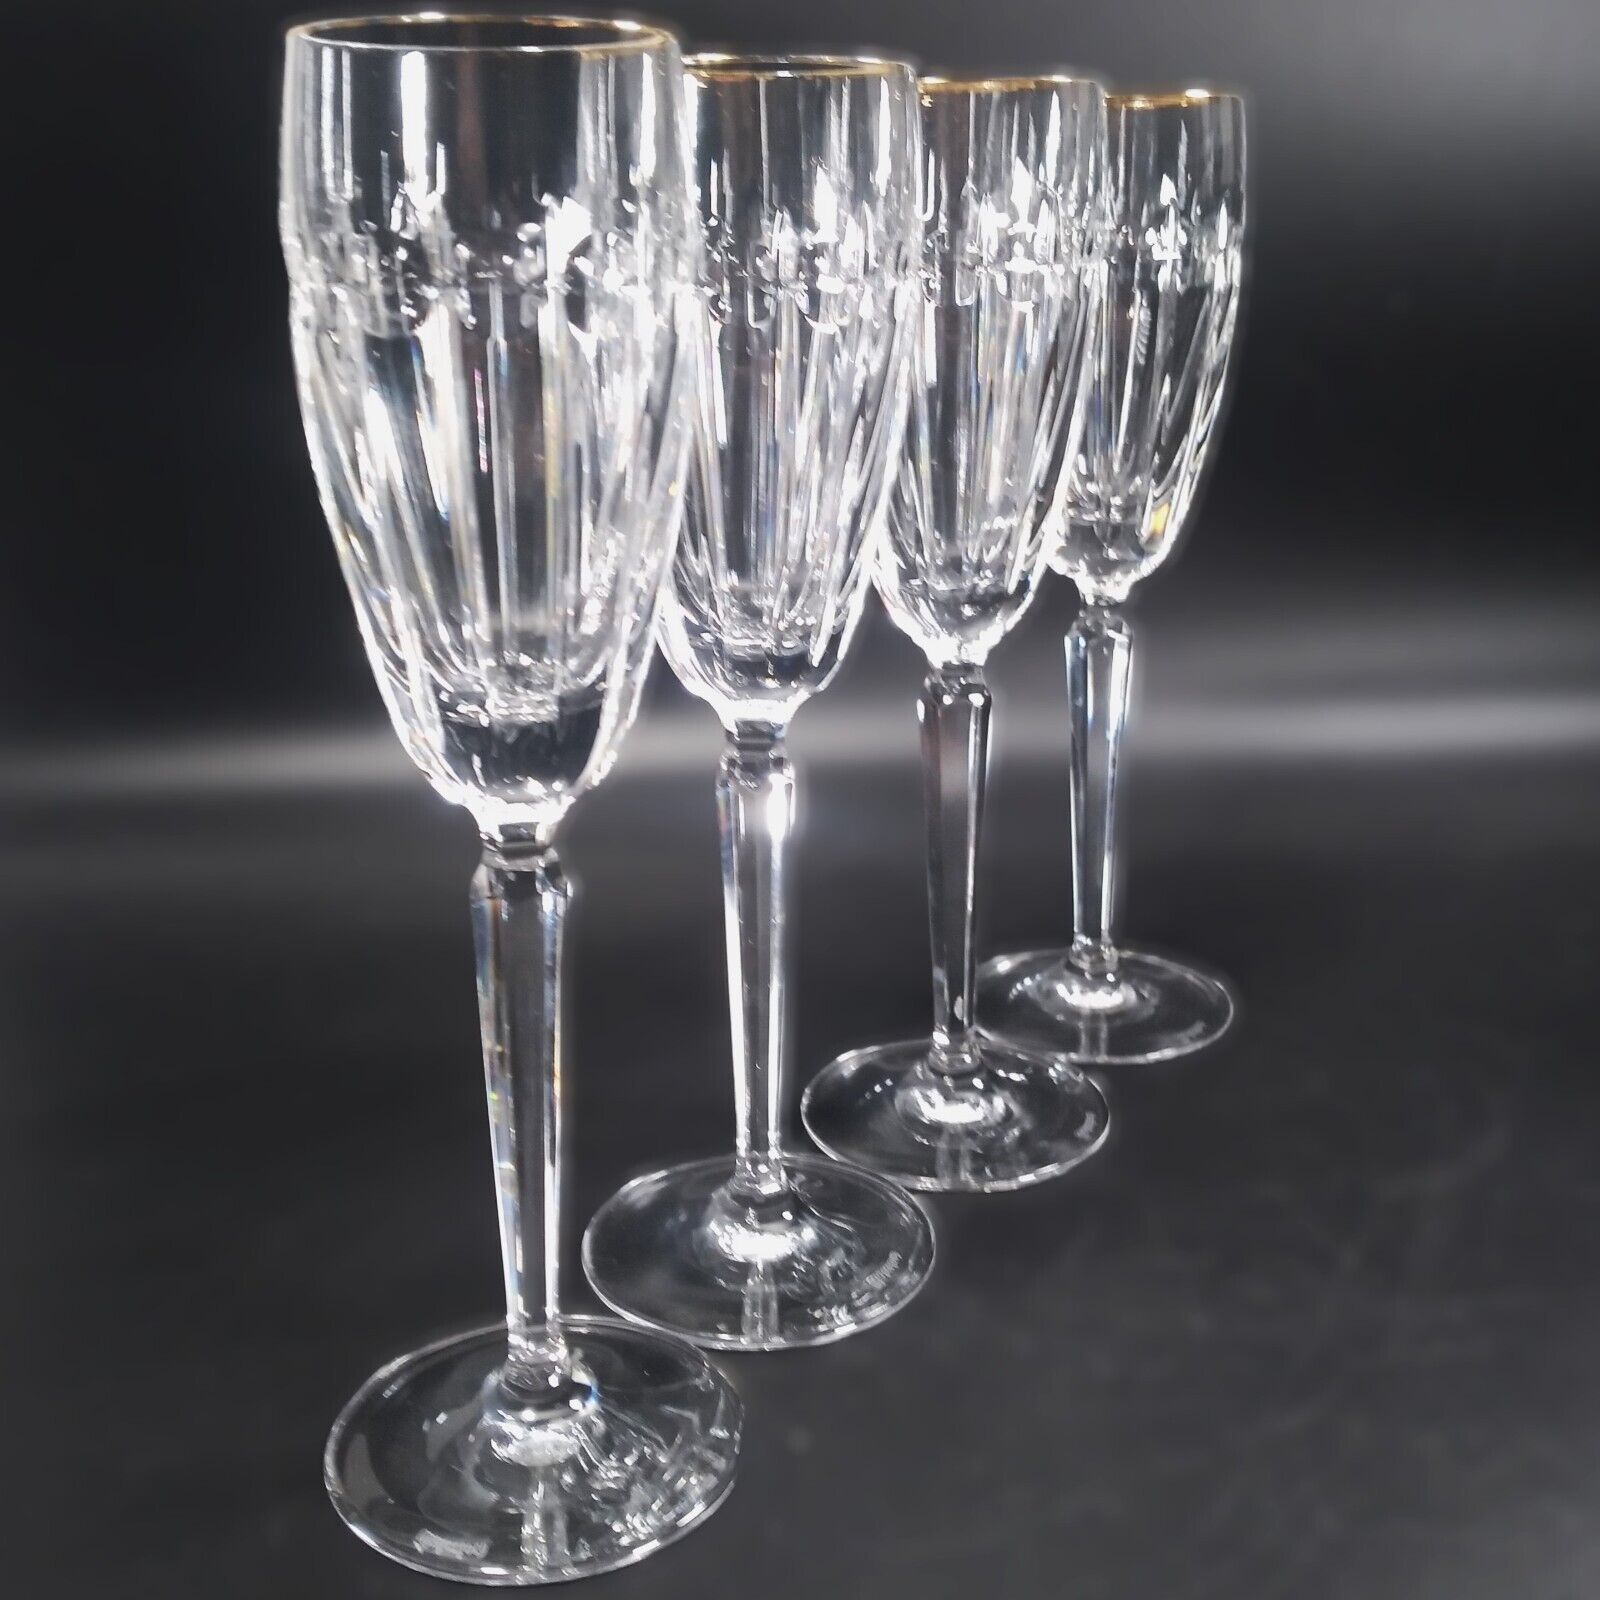 4 WATERFORD Crystal GRENVILLE GOLD Champagne Flutes Vertical Cut -Faded Gold Rim